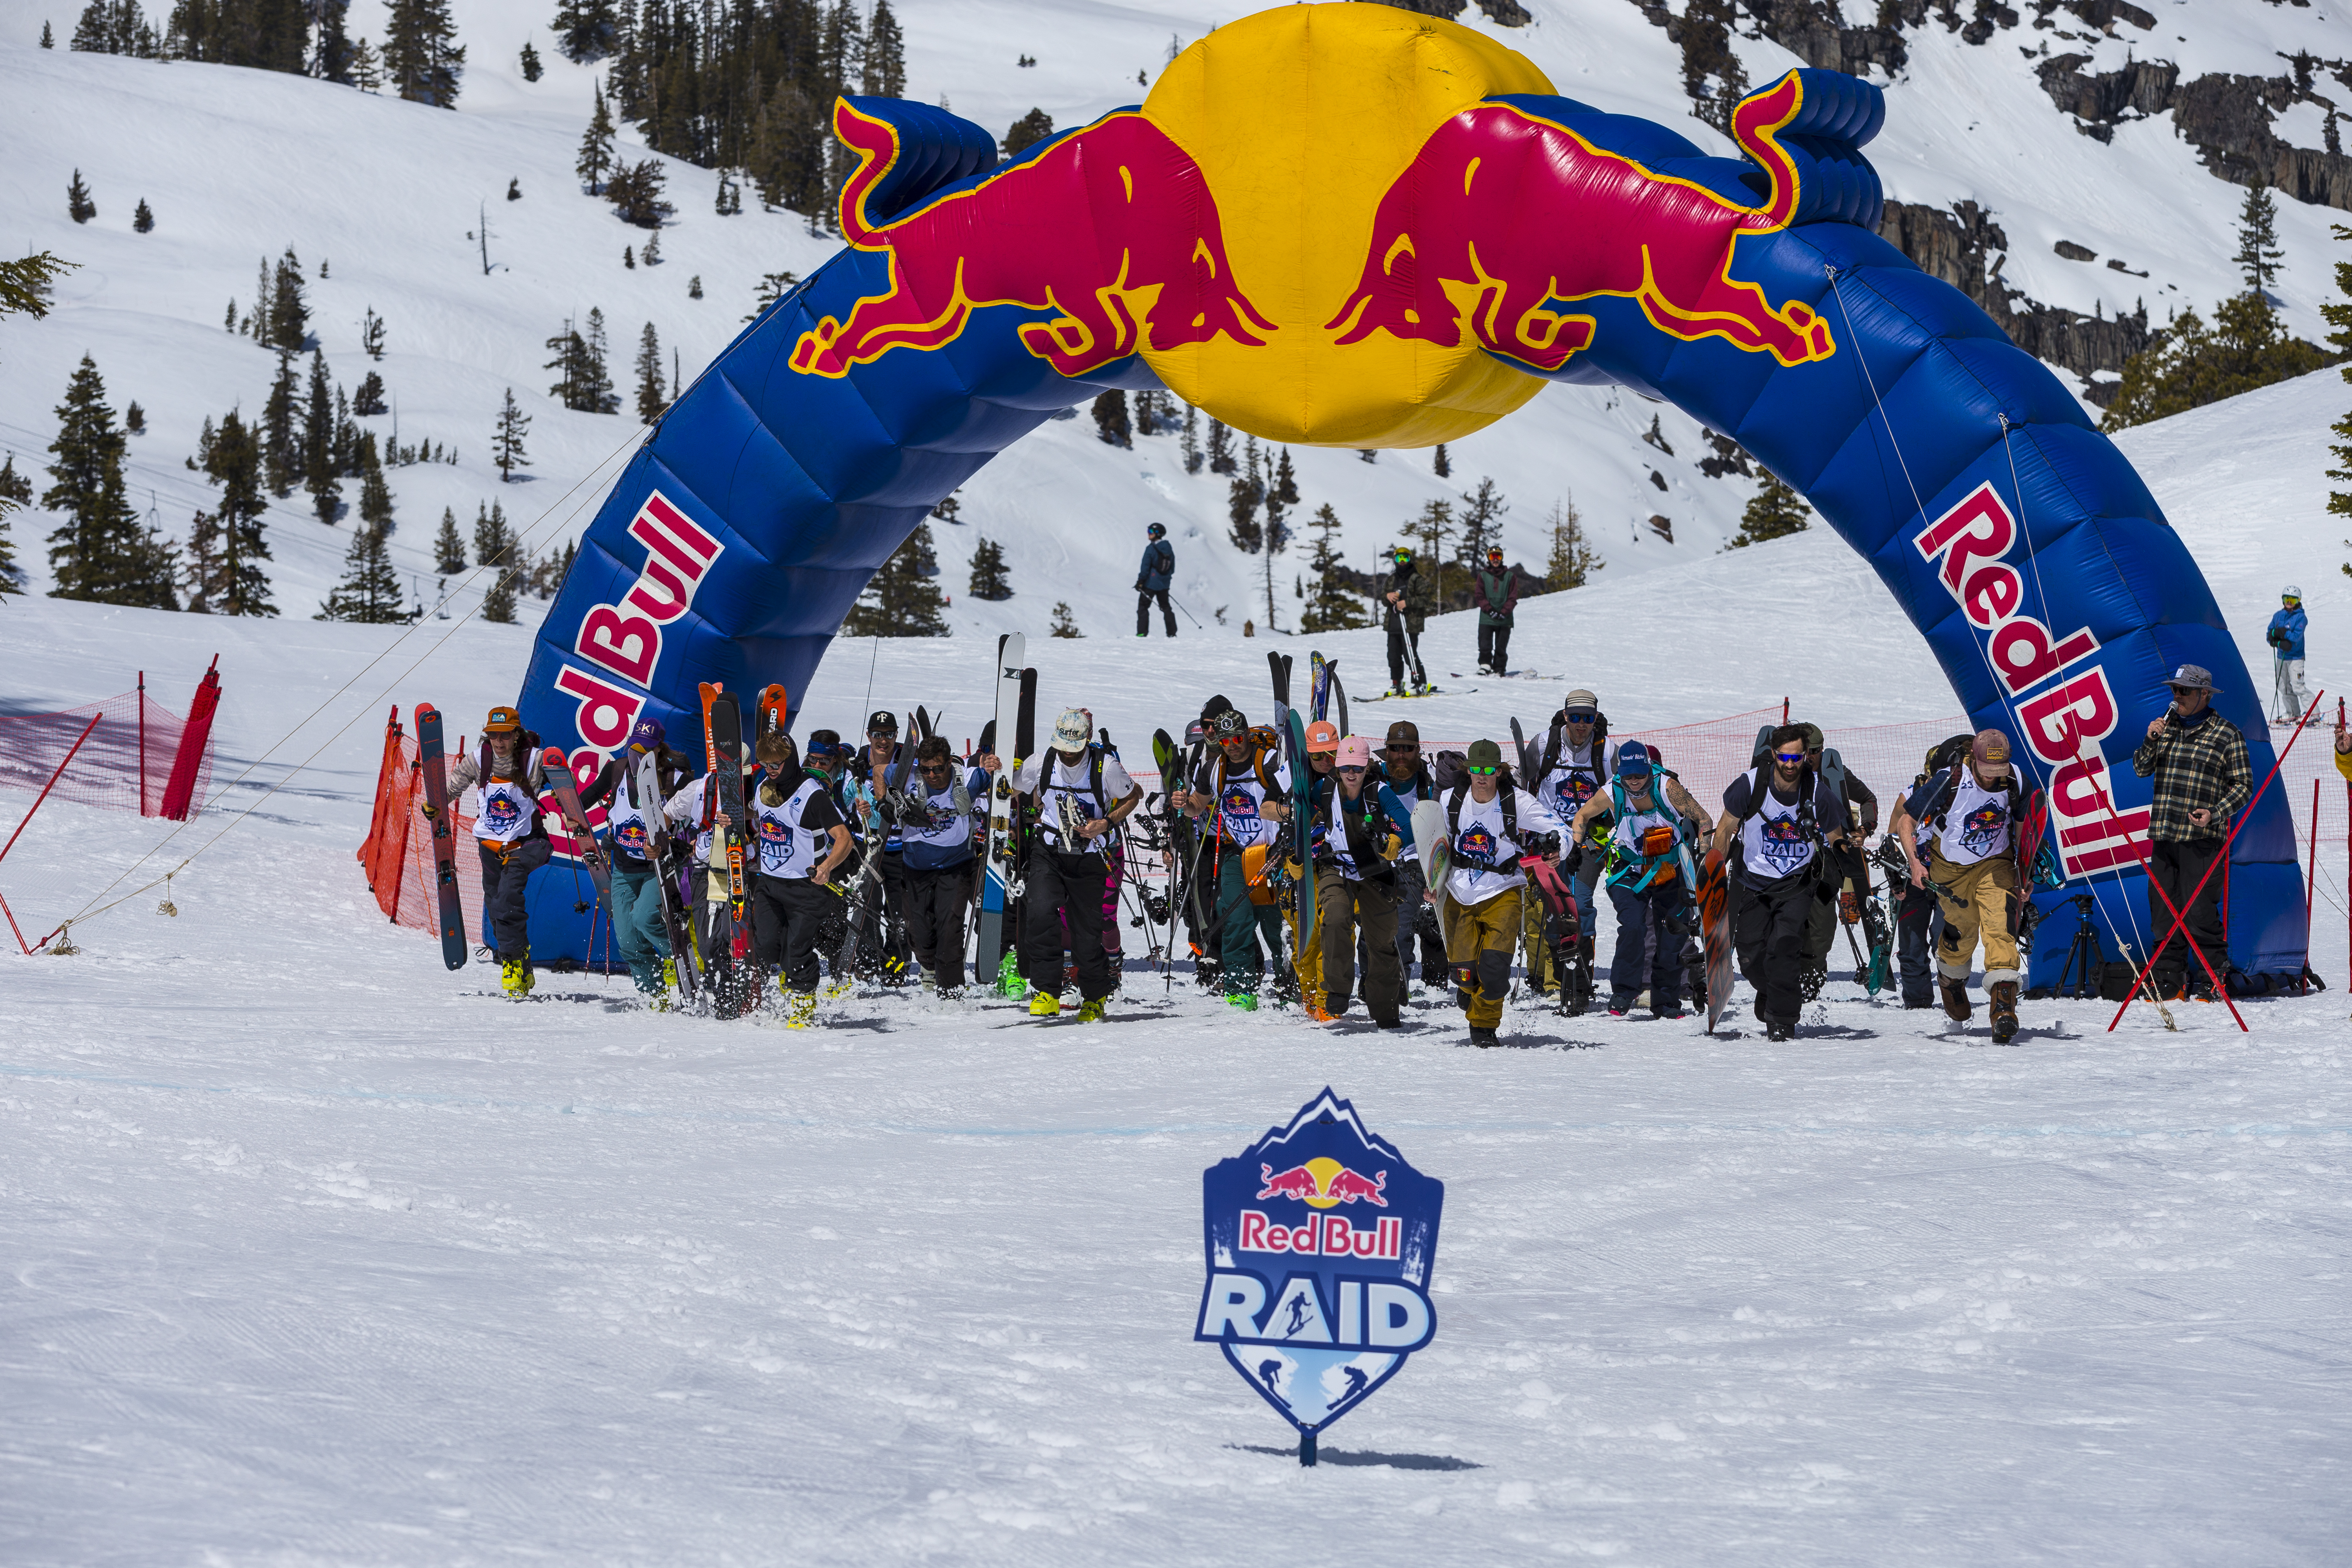 Red Bull Raid, Uphill & Downhill Skiing/Splitboarding Competition, Is Back! (Palisades Tahoe)